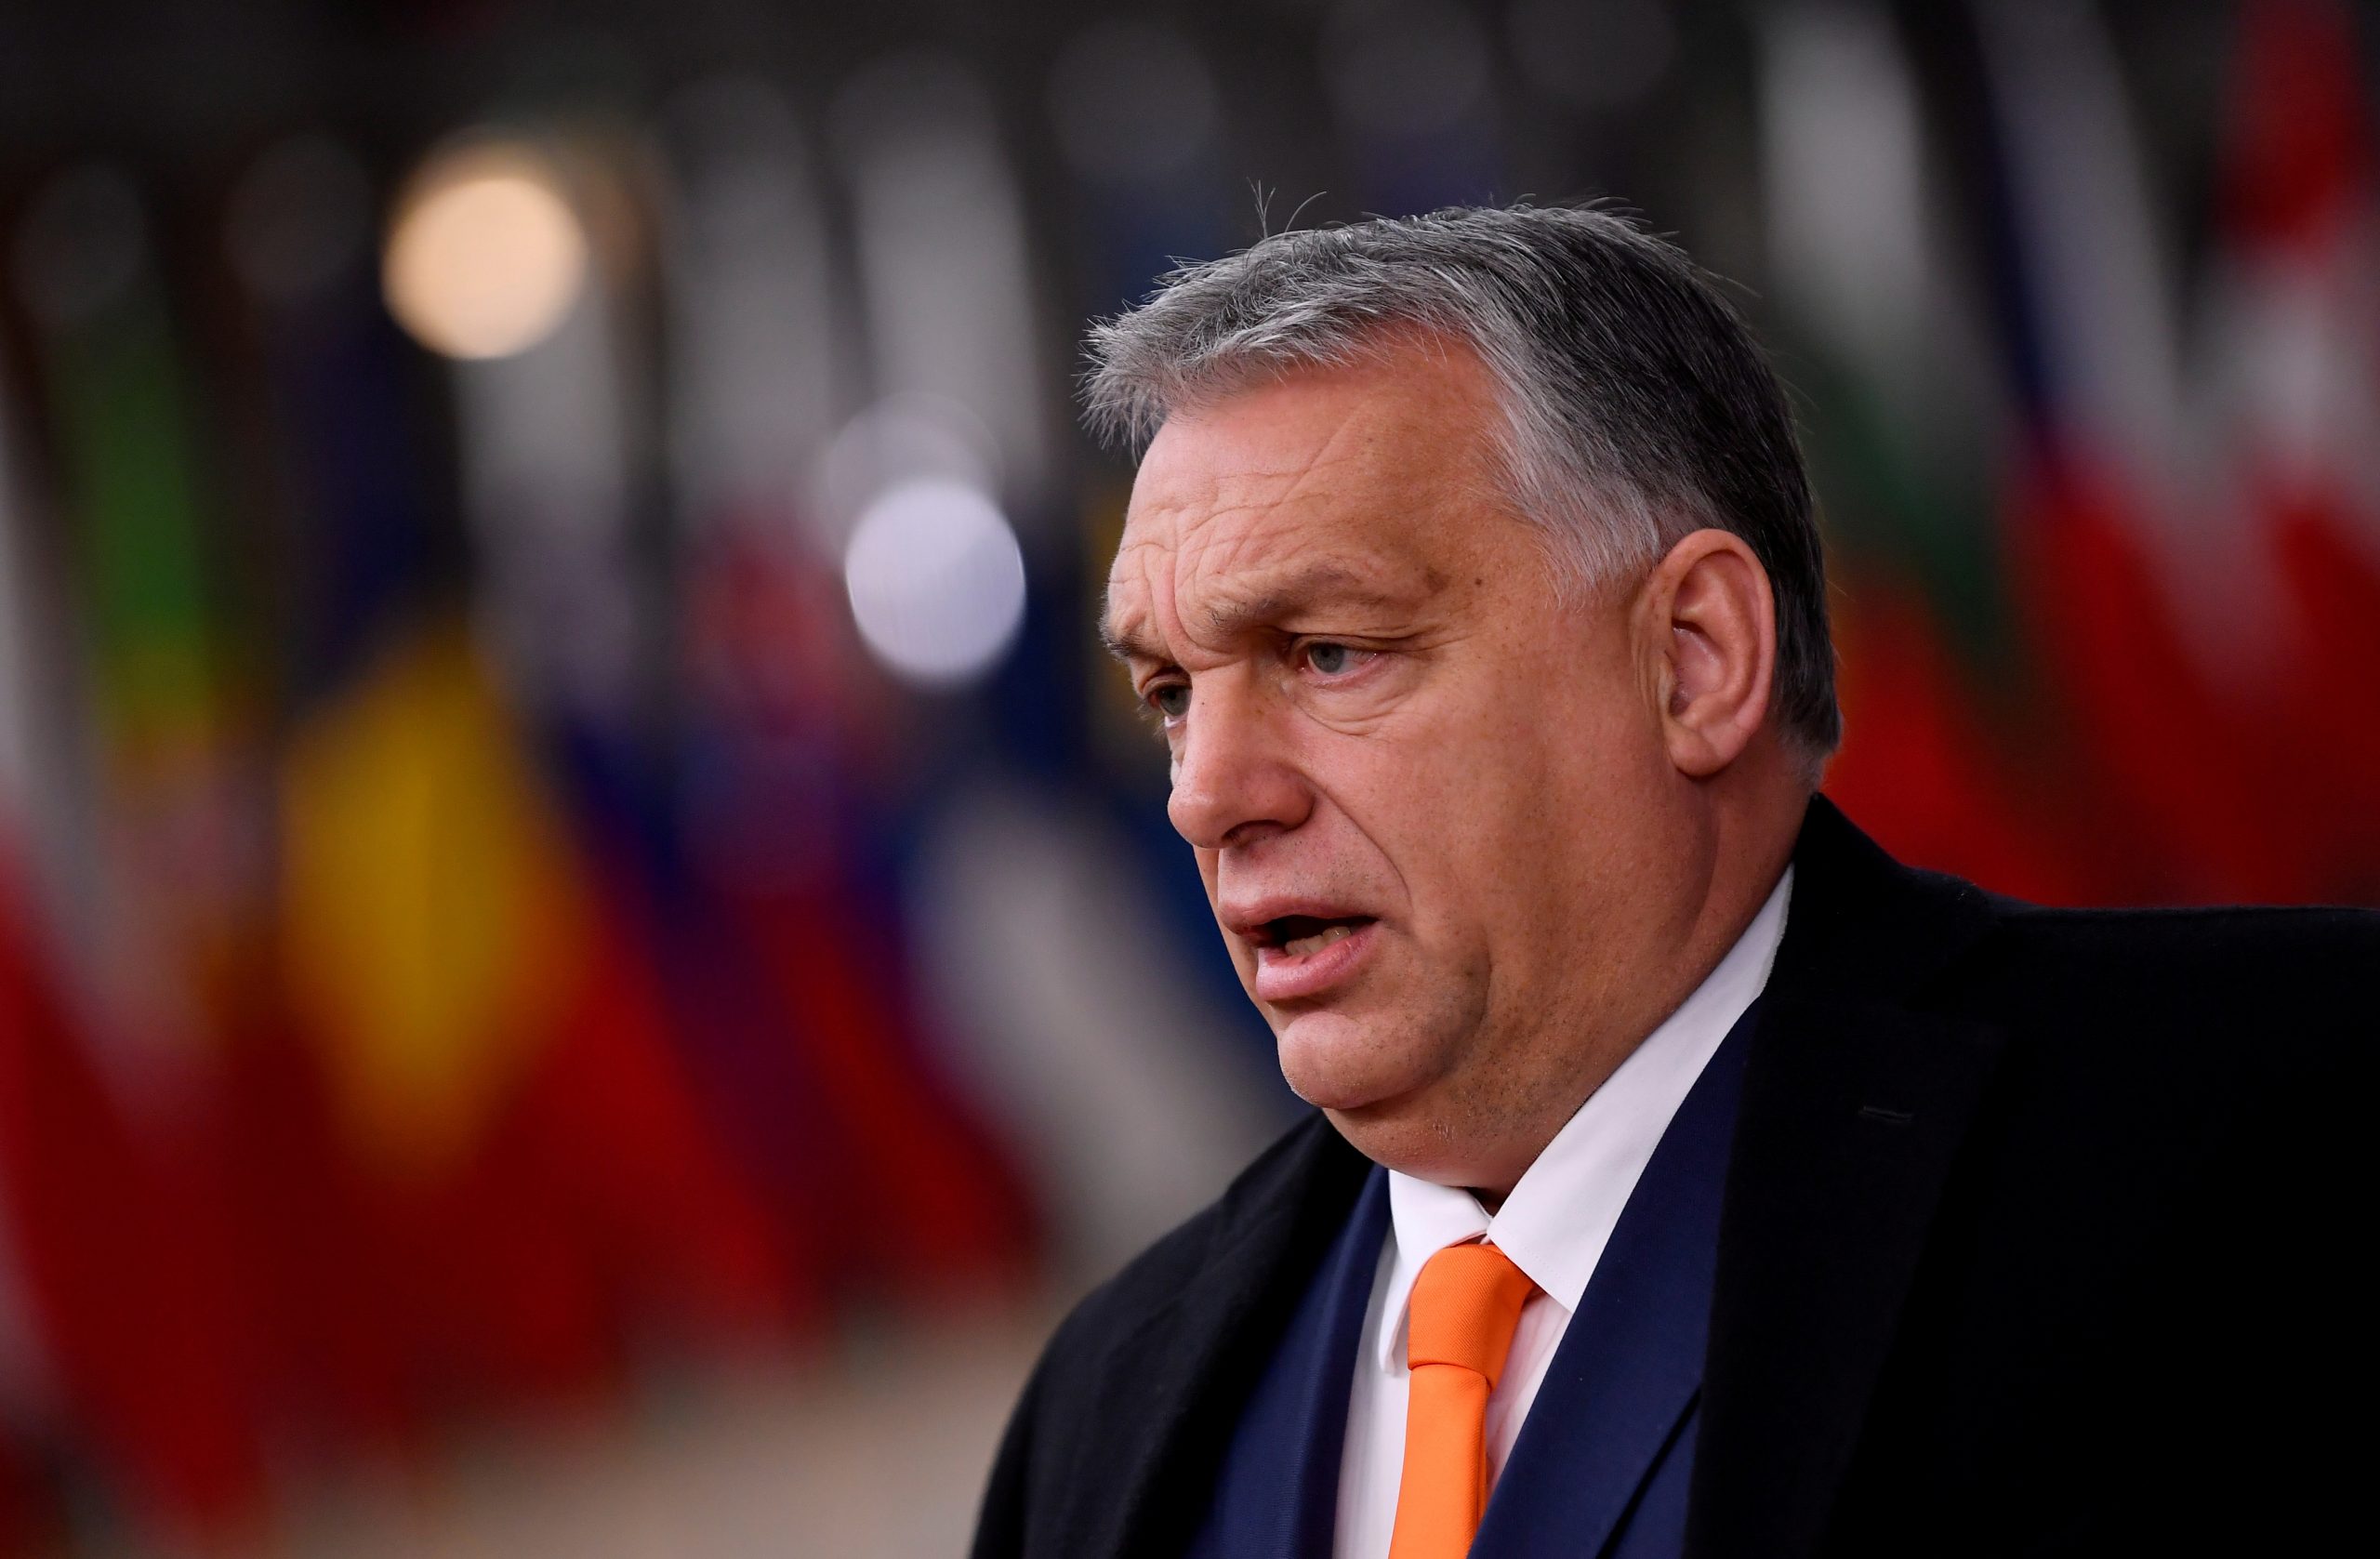 FILE PHOTO: Hungary's Prime Minister Viktor Orban speaks on arrival for an EU summit in Brussels FILE PHOTO: Hungary's Prime Minister Viktor Orban speaks as he arrives to attend a face-to-face EU summit amid the coronavirus disease (COVID-19) lockdown in Brussels, Belgium December 10, 2020. John Thys/Pool via REUTERS/File Photo POOL